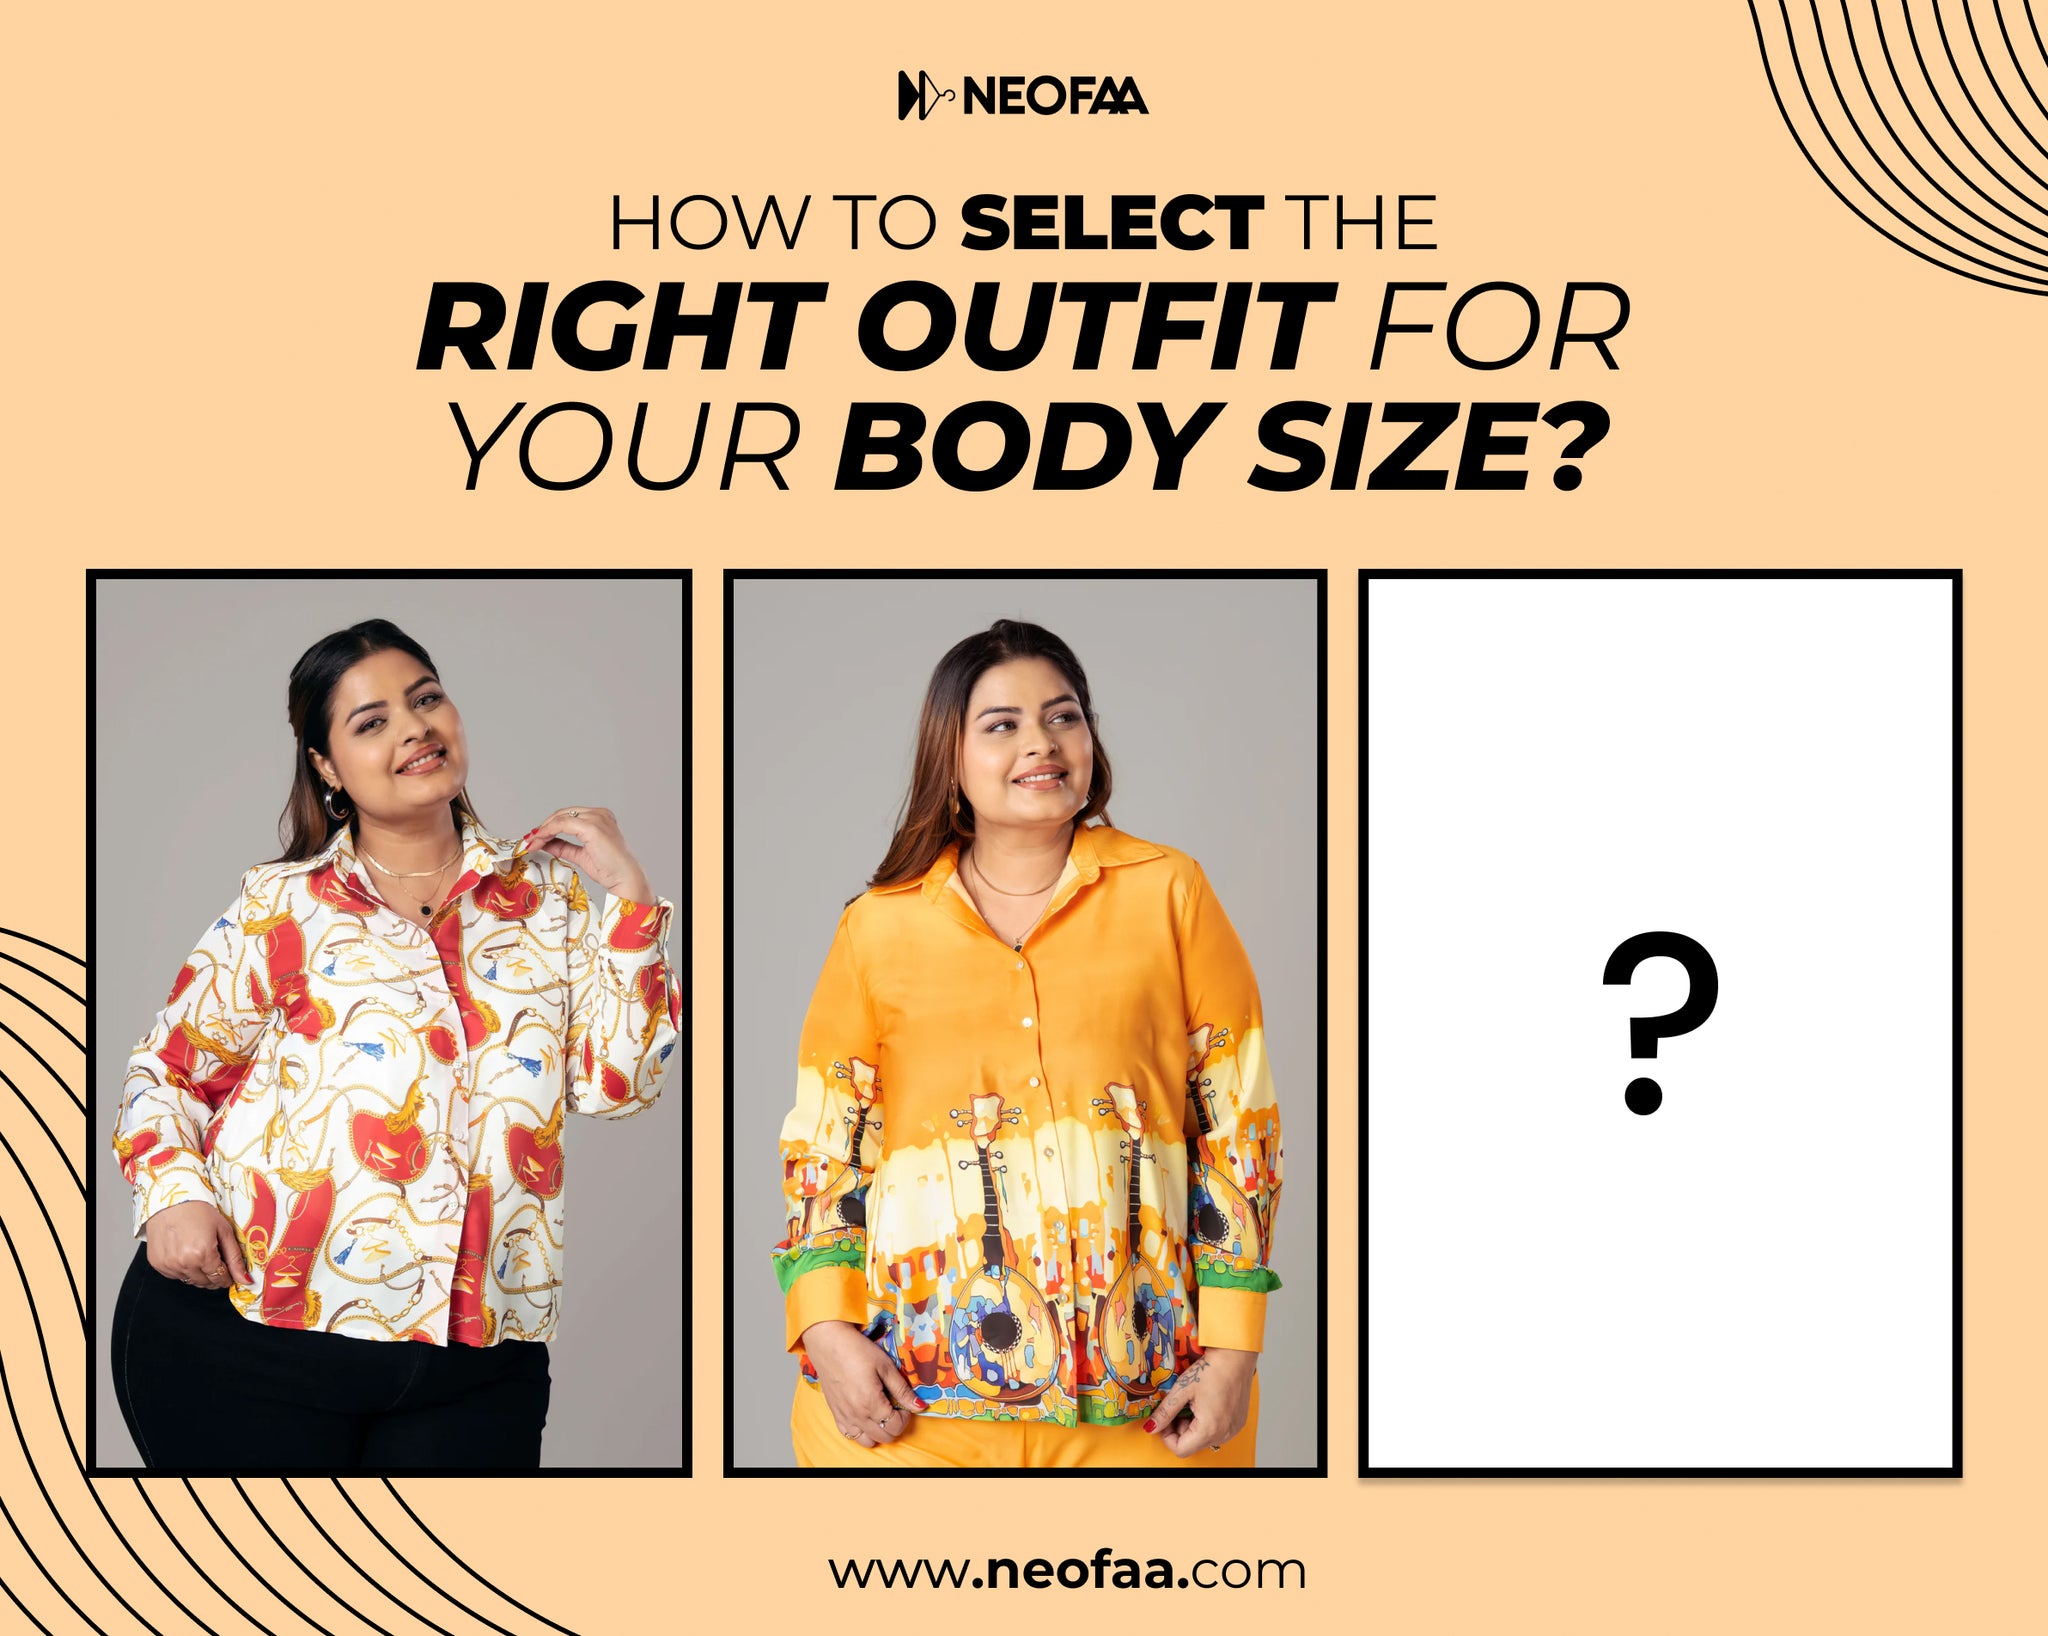 How to select the right outfit for your body size?